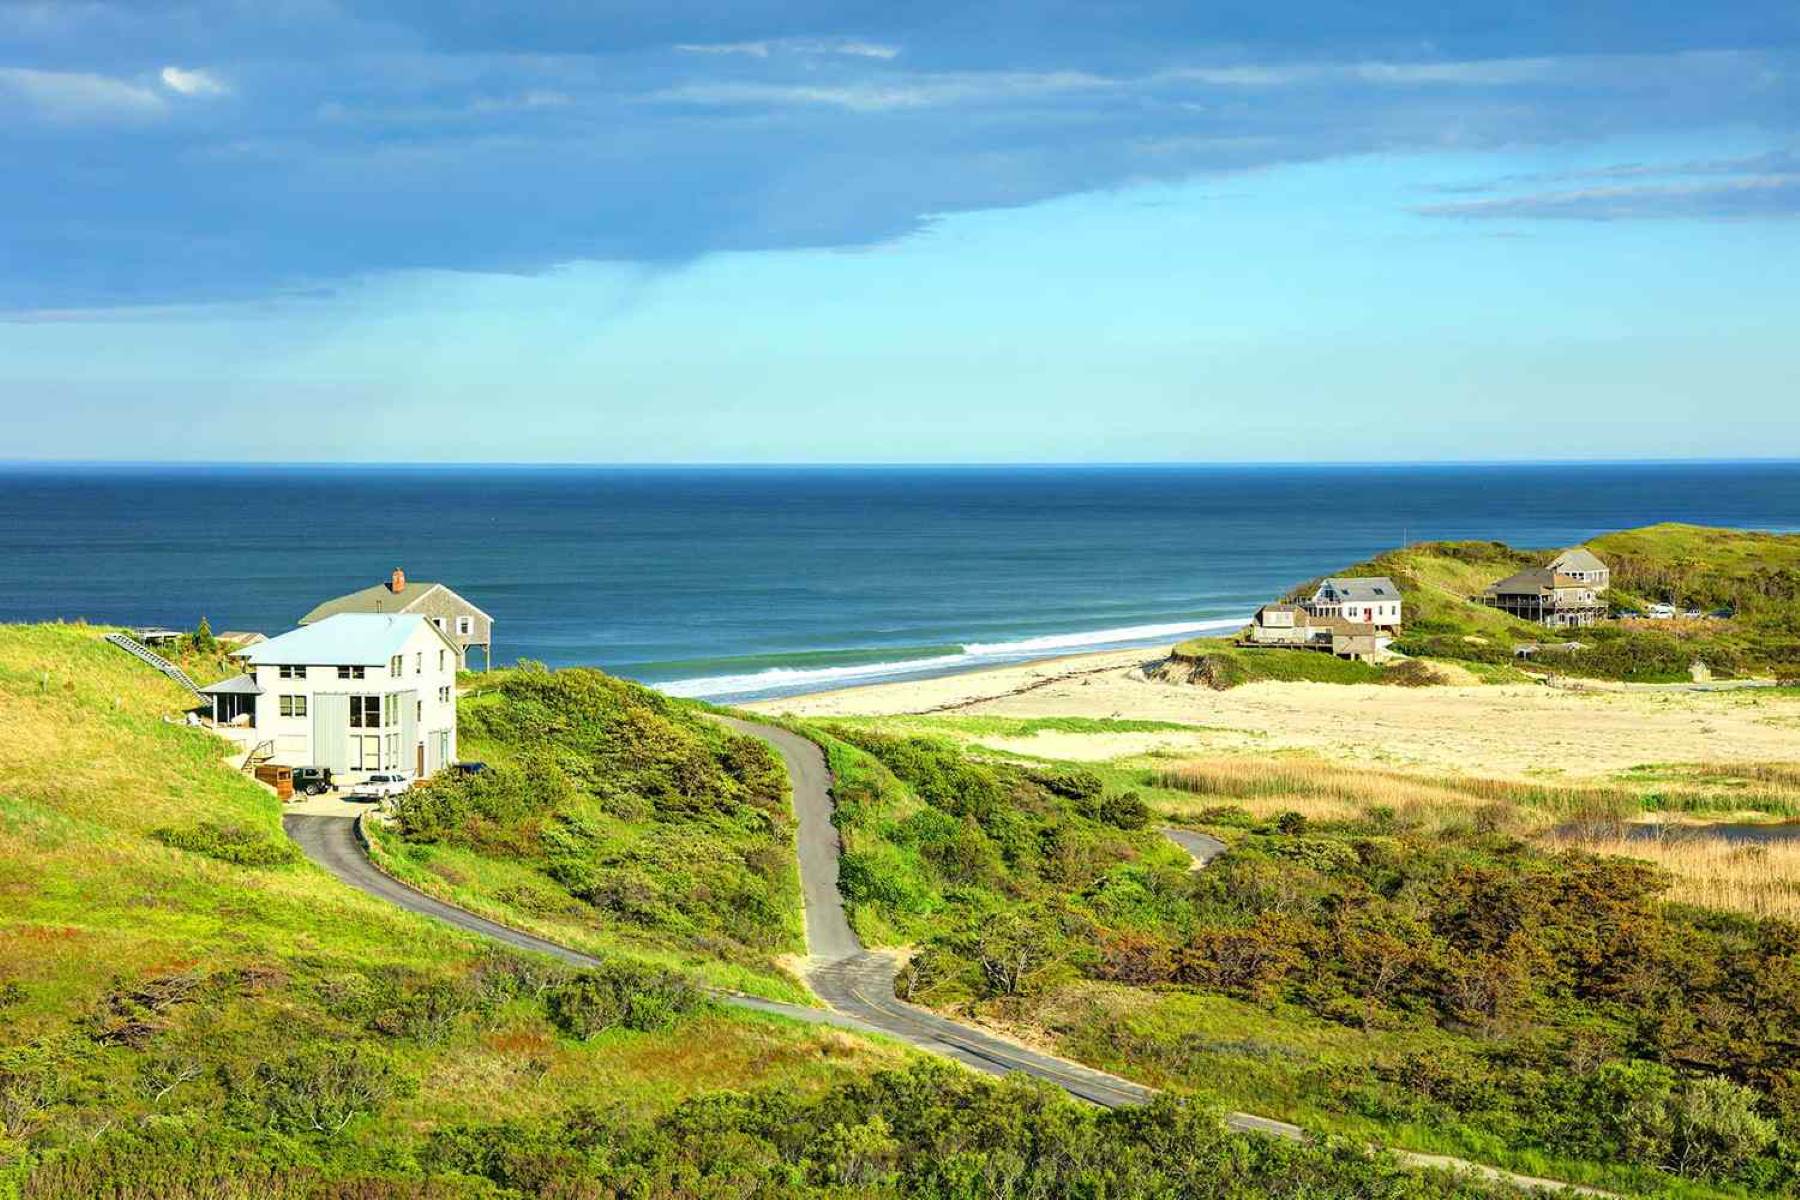 Top East Coast States With The Most Stunning Beaches